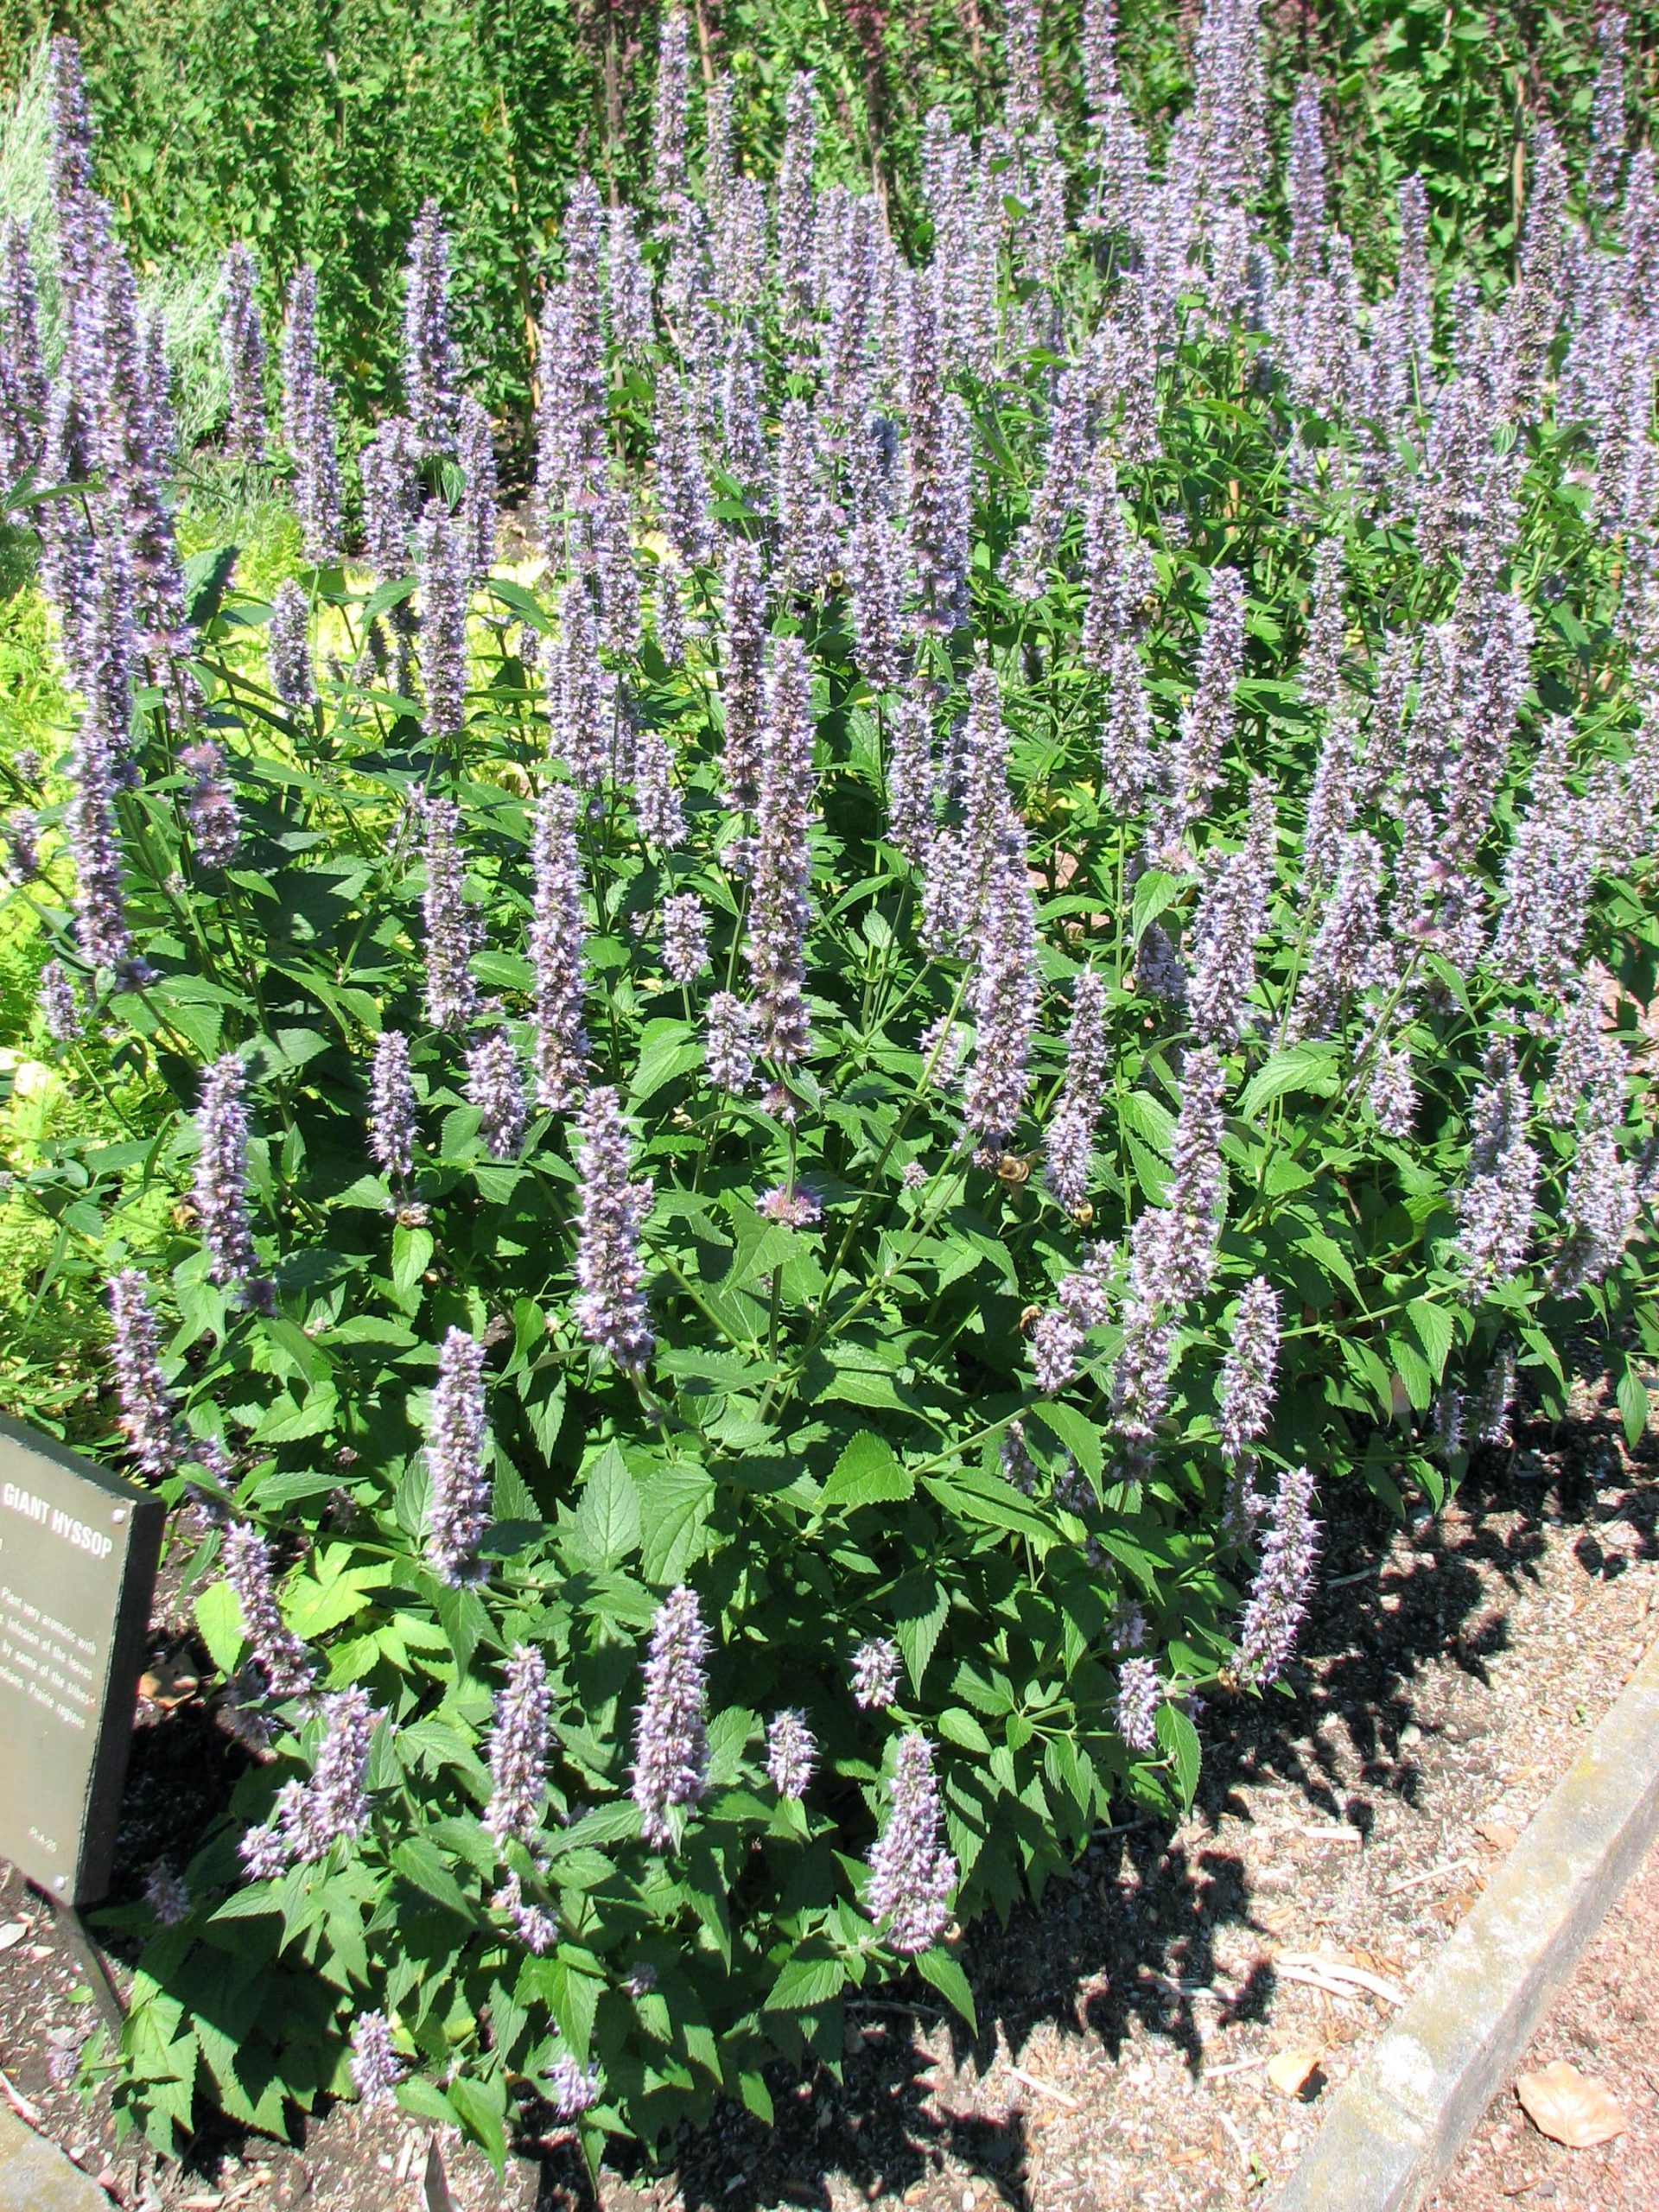 Anise-hyssop in bloom.